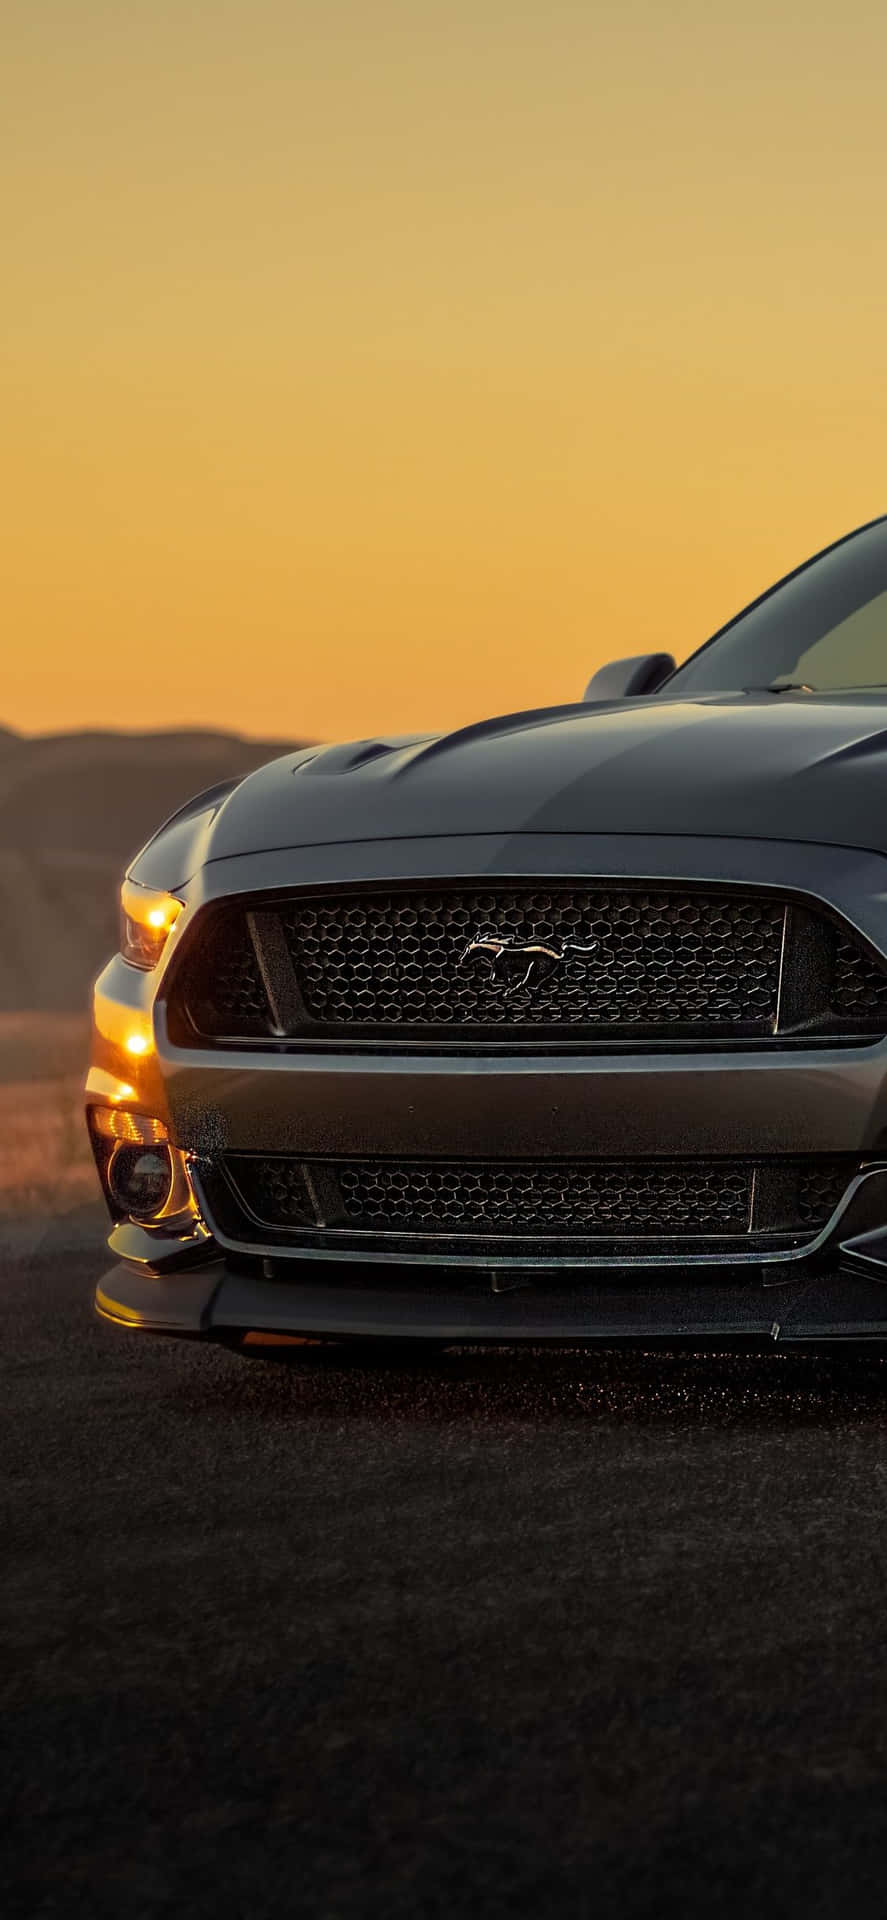 Get the latest Ford Mustang on your phone Wallpaper